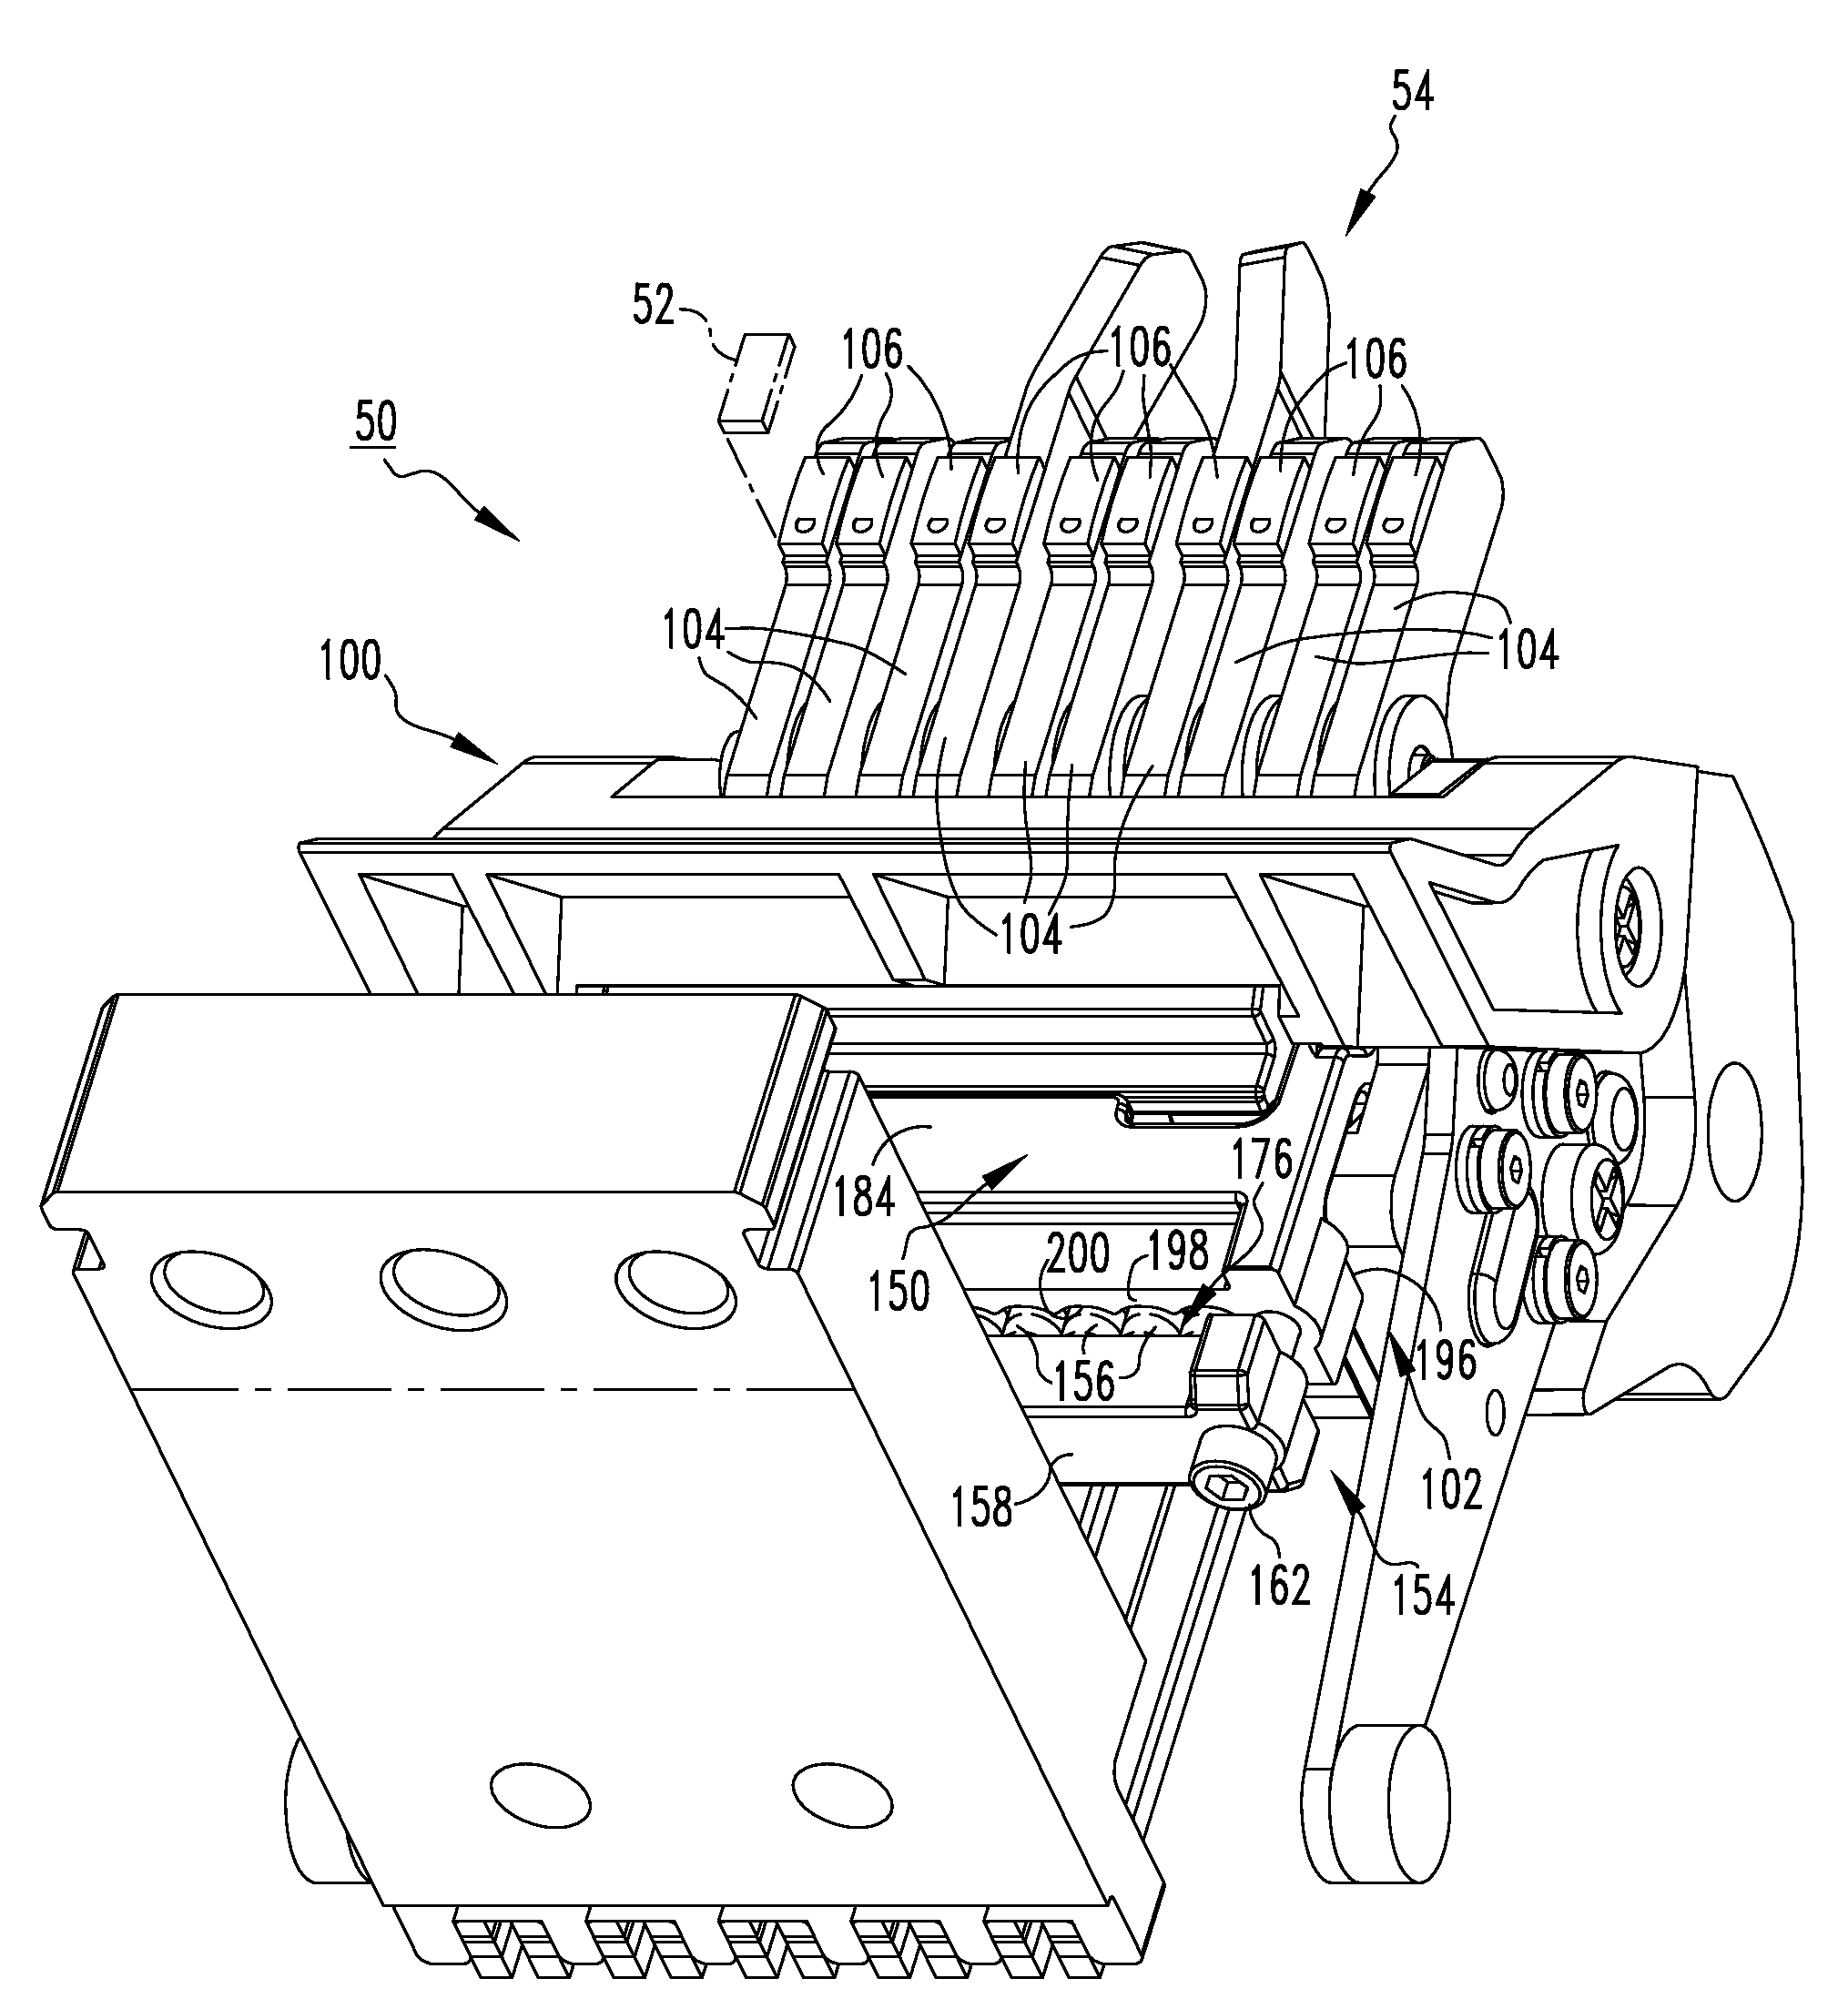 Electrical switching apparatus and adjustable carrier assembly therefor